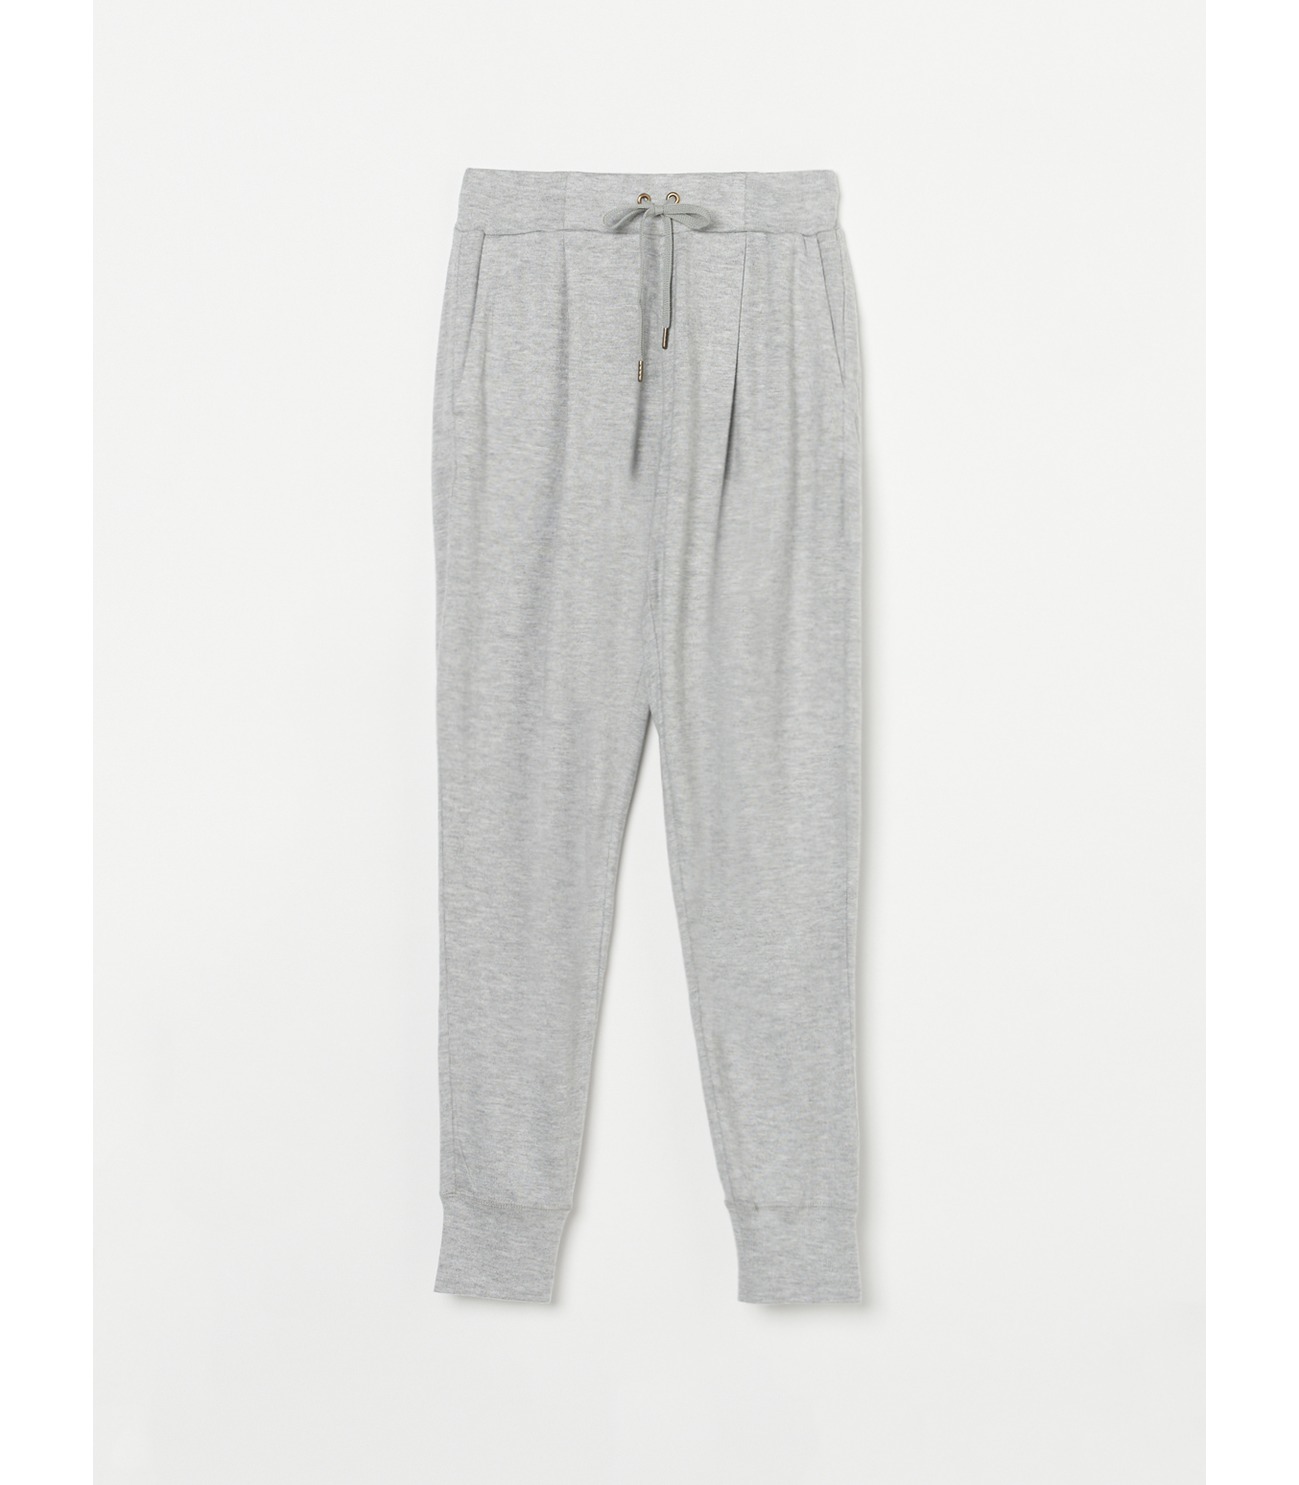 Brushed sweater jogger pant 詳細画像 heather grey 2